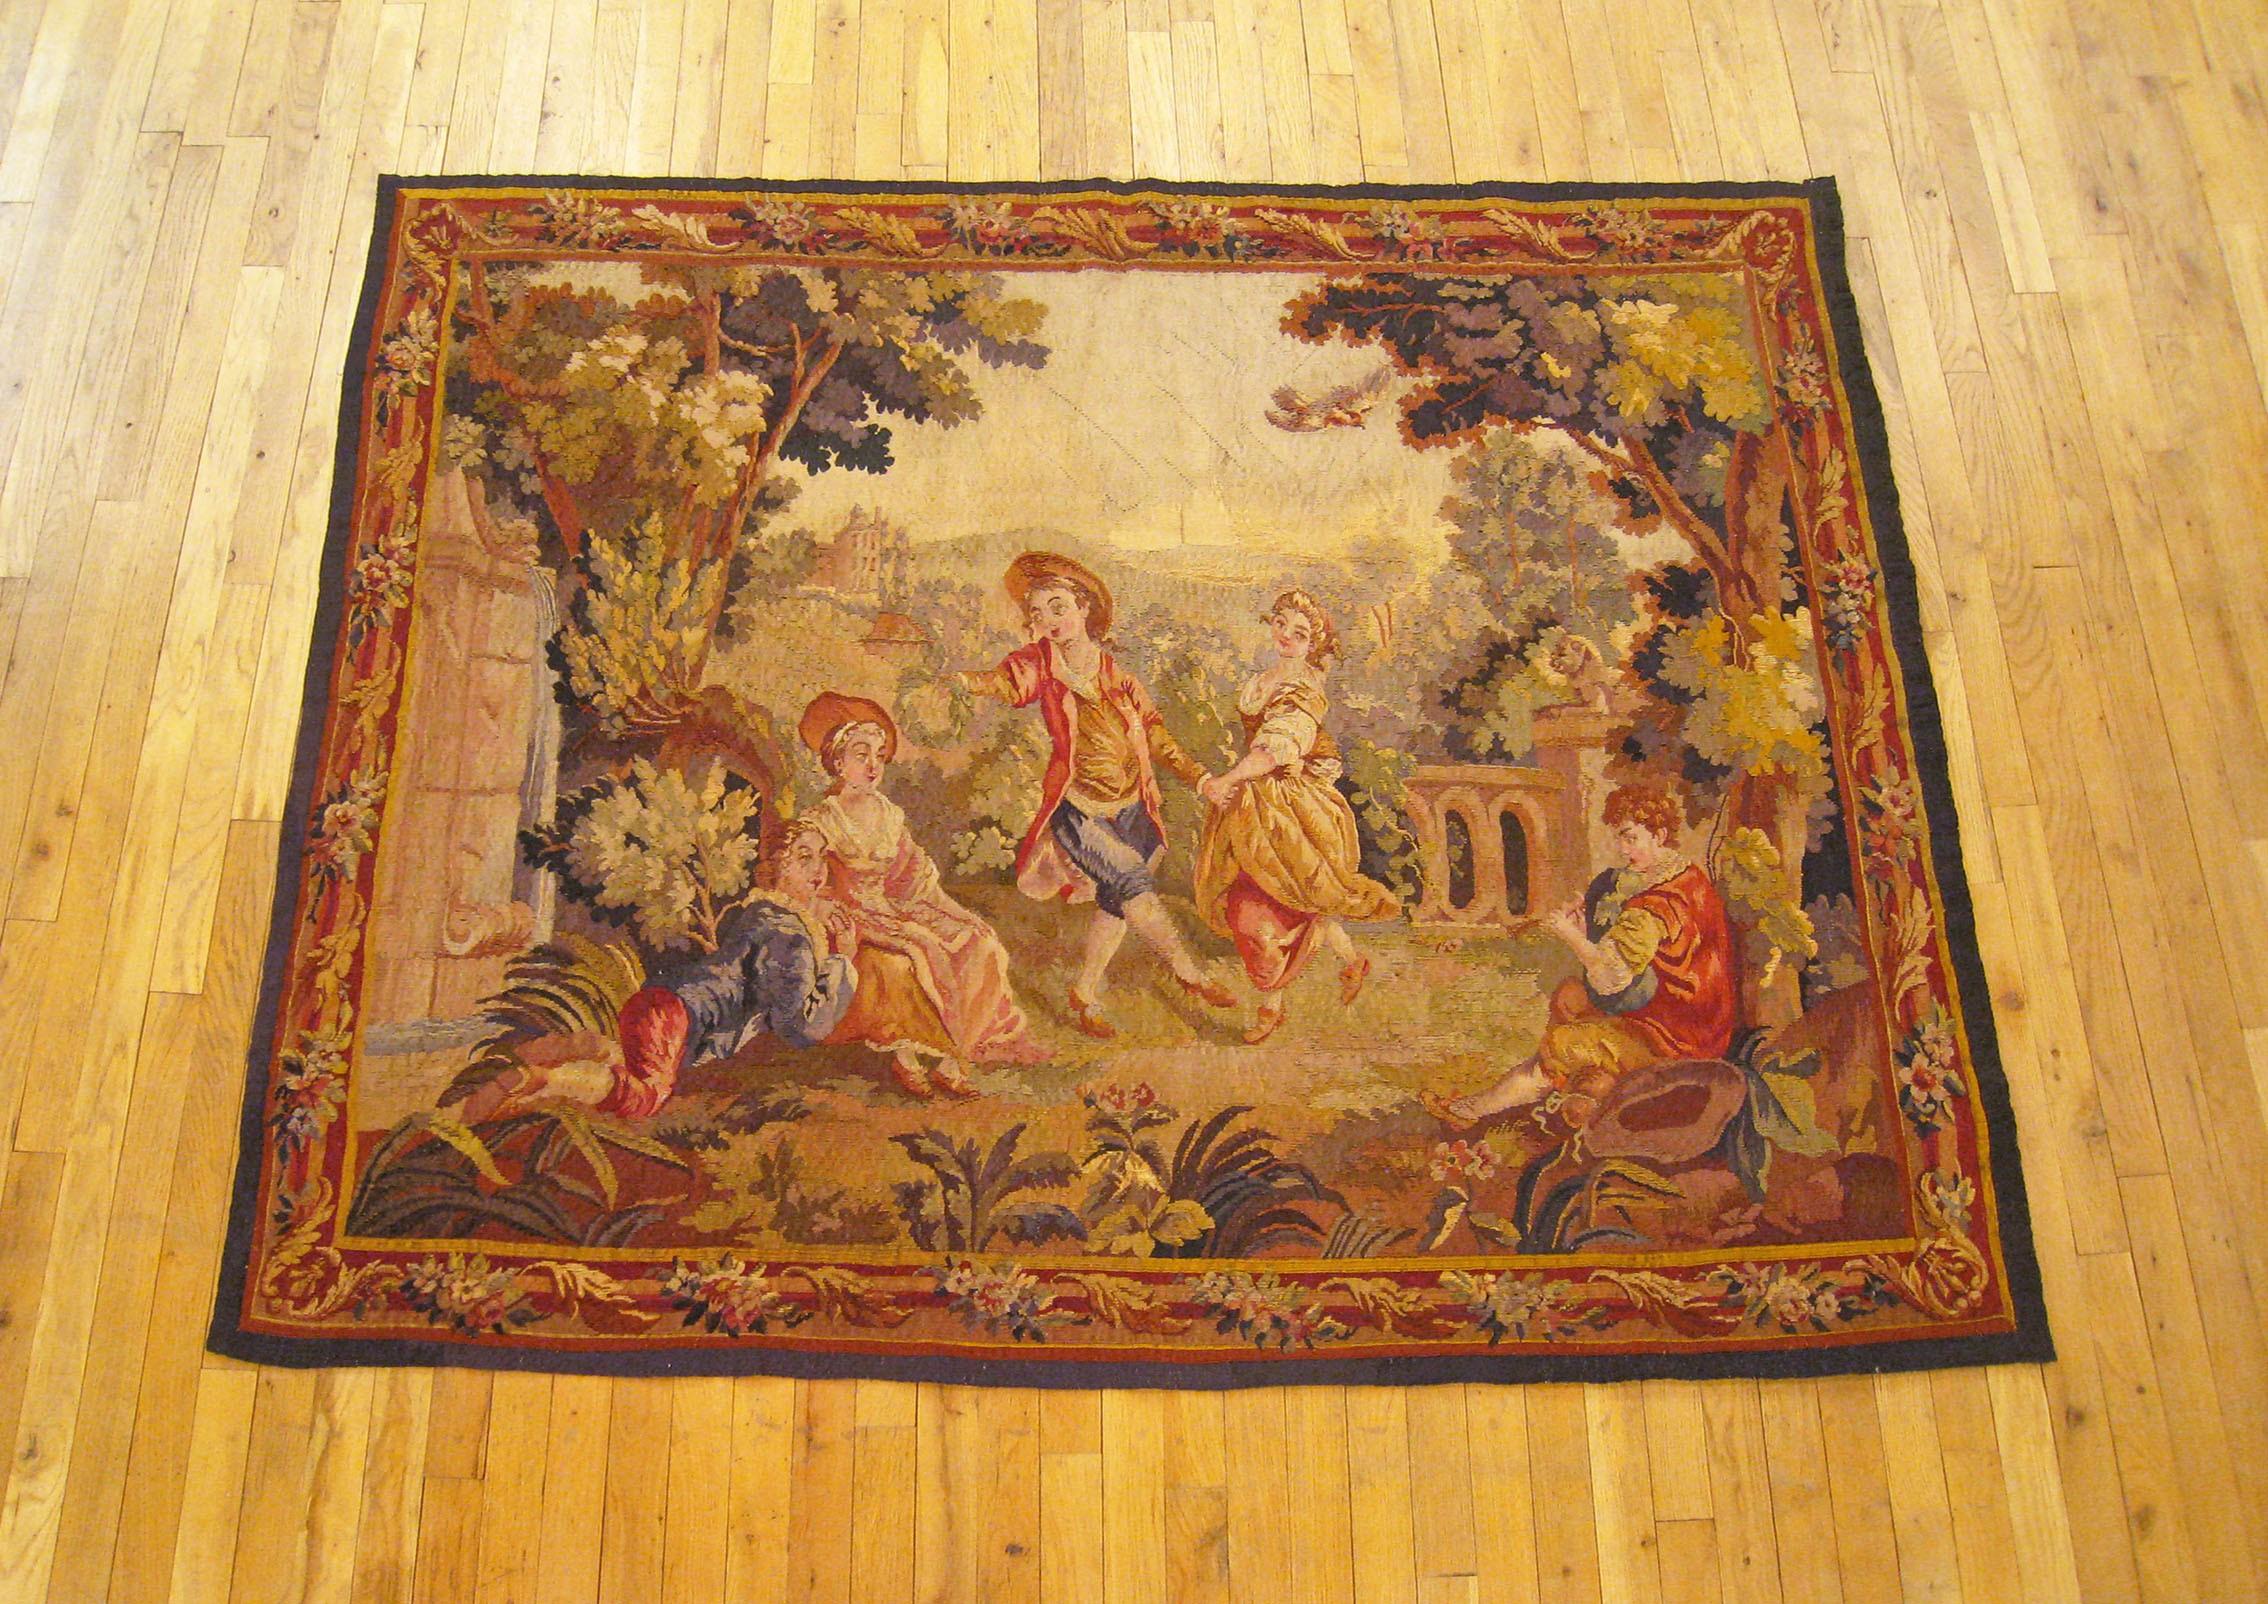 A French Aubusson tapestry from the 19th century, depicting several young courtiers spending a leisurely afternoon gaily dancing and carousing within the splendidly maintained verdant palatial grounds. Within a winding border of flower and acanthus